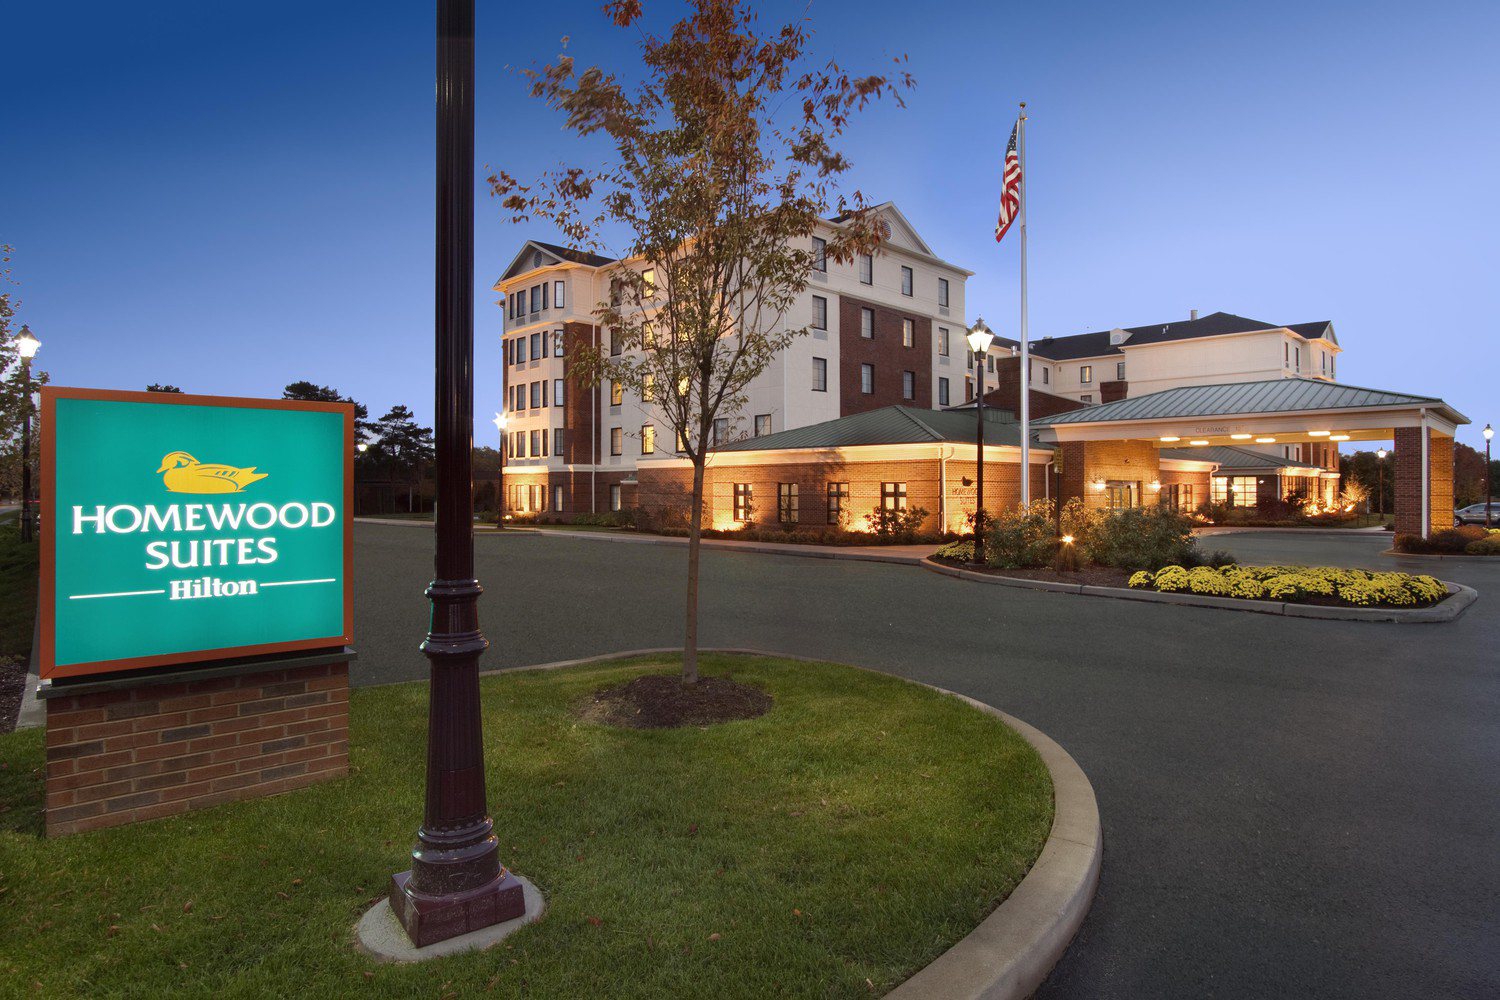 Photo of Homewood Suites by Hilton Newtown, Newtown, PA